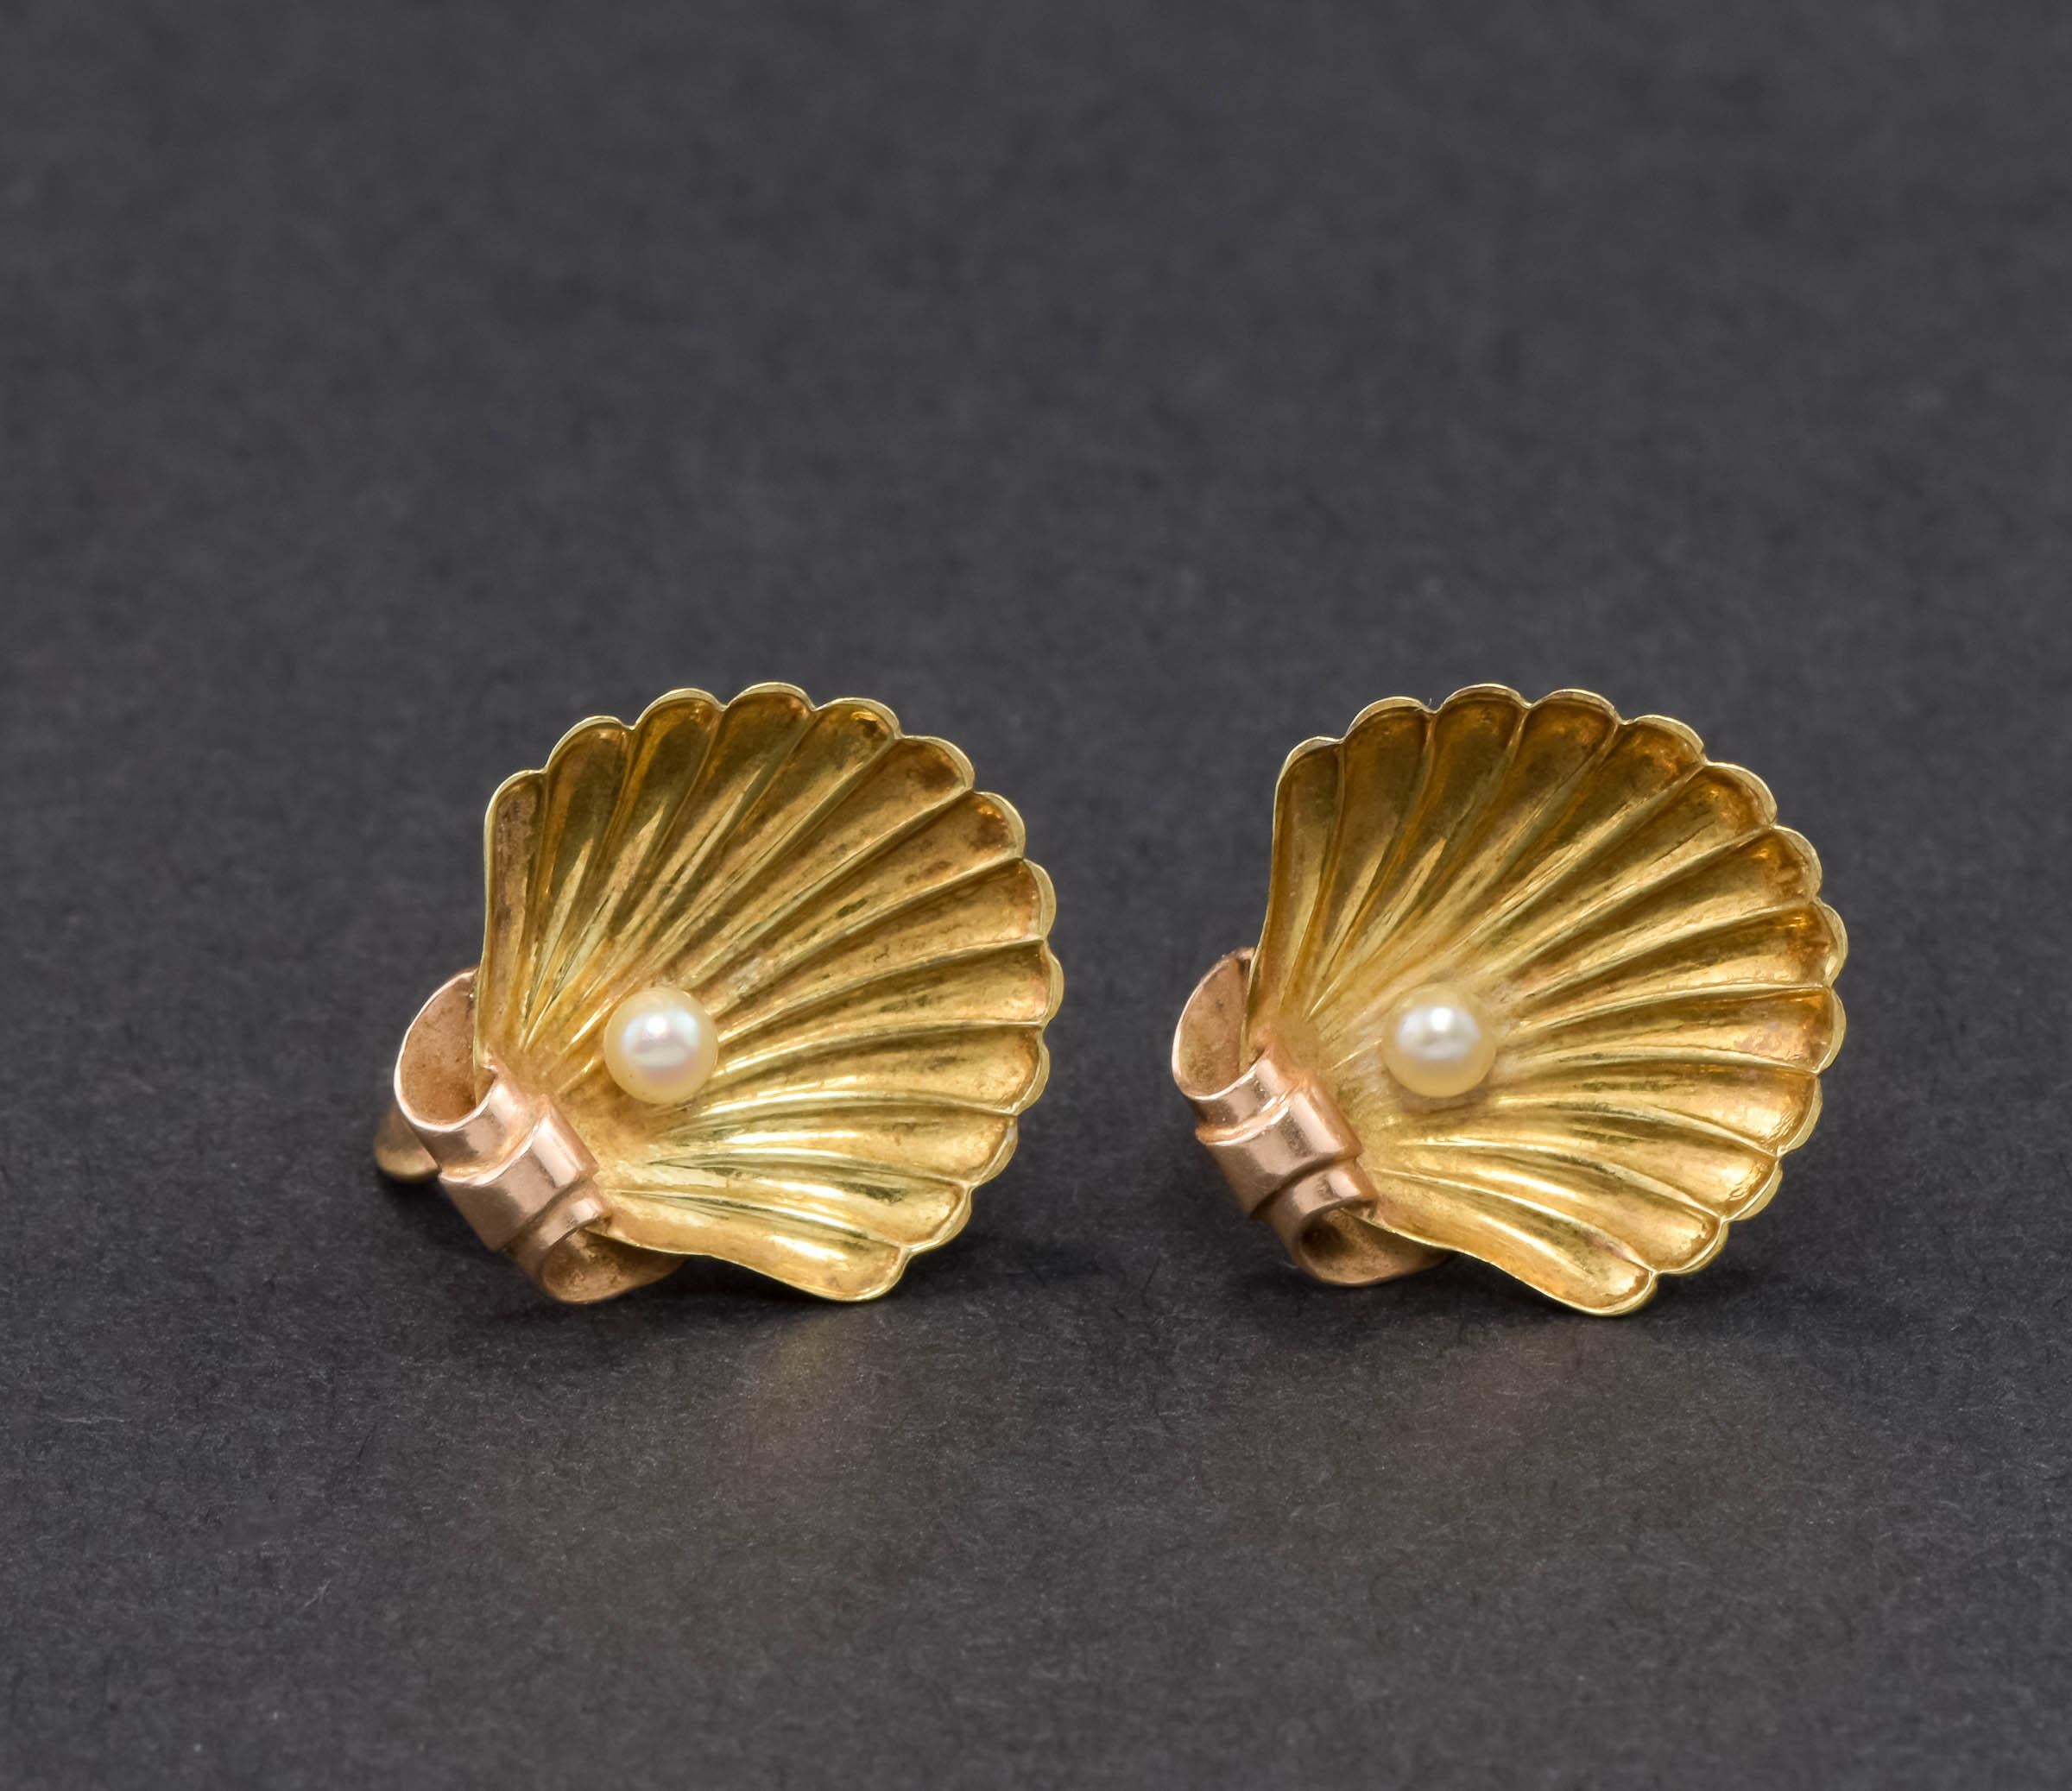 I'm pleased to offer a lovely pair of antique 14K gold Shell earrings by Sloan & Company.  These earrings have French screw backs so are meant for non-pierced ears, though they could be converted to pierced style earrings, if desired.

Each earring